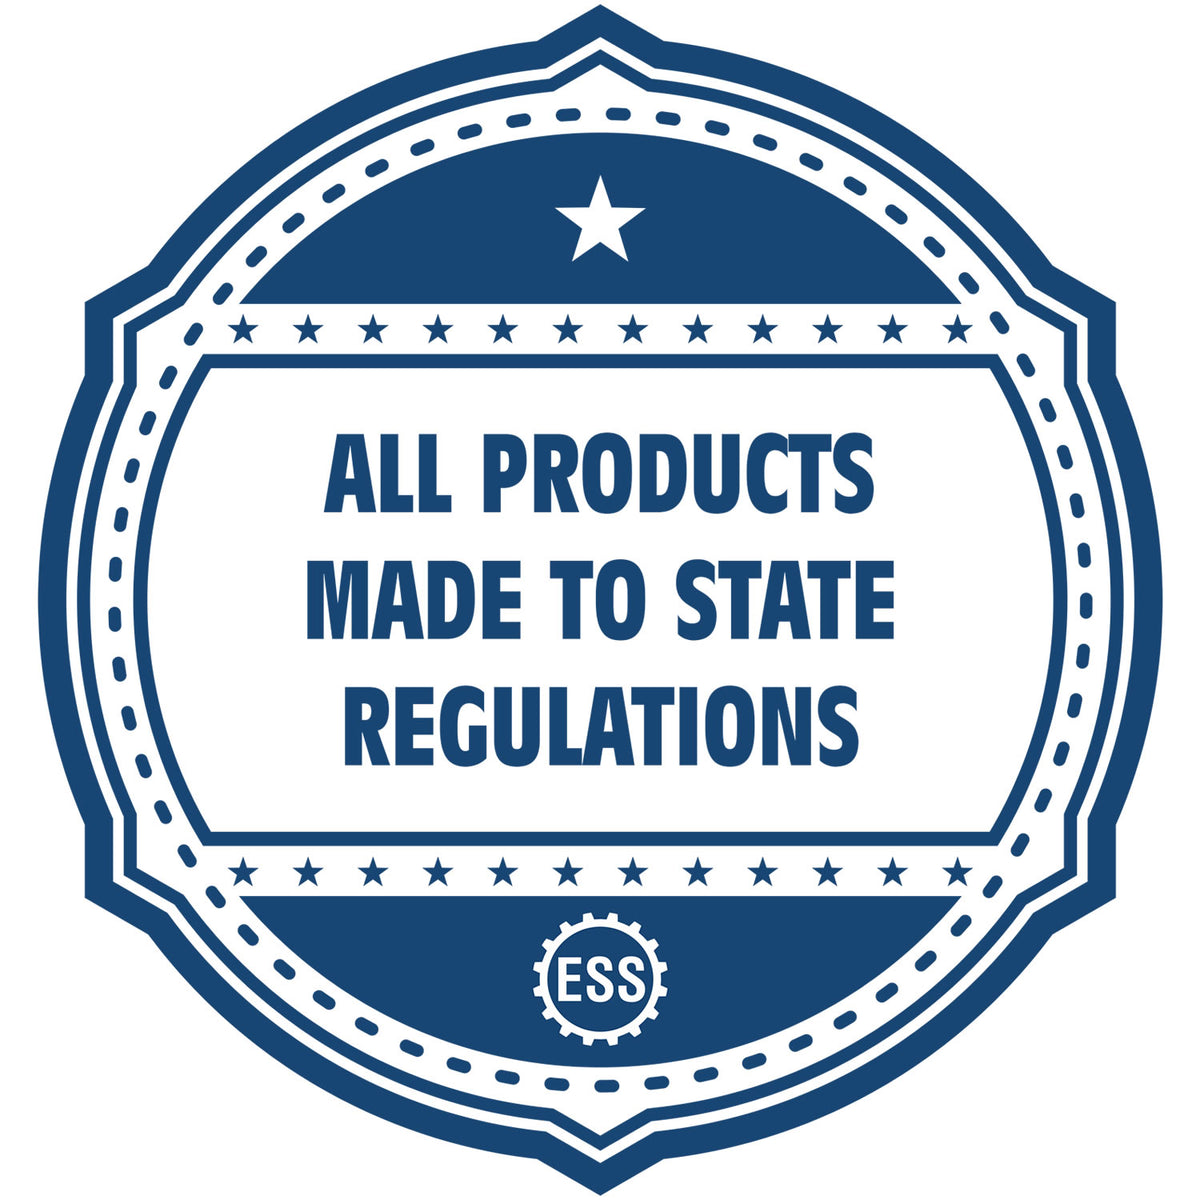 An icon or badge element for the Premium MaxLight Pre-Inked Pennsylvania Landscape Architectural Stamp showing that this product is made in compliance with state regulations.